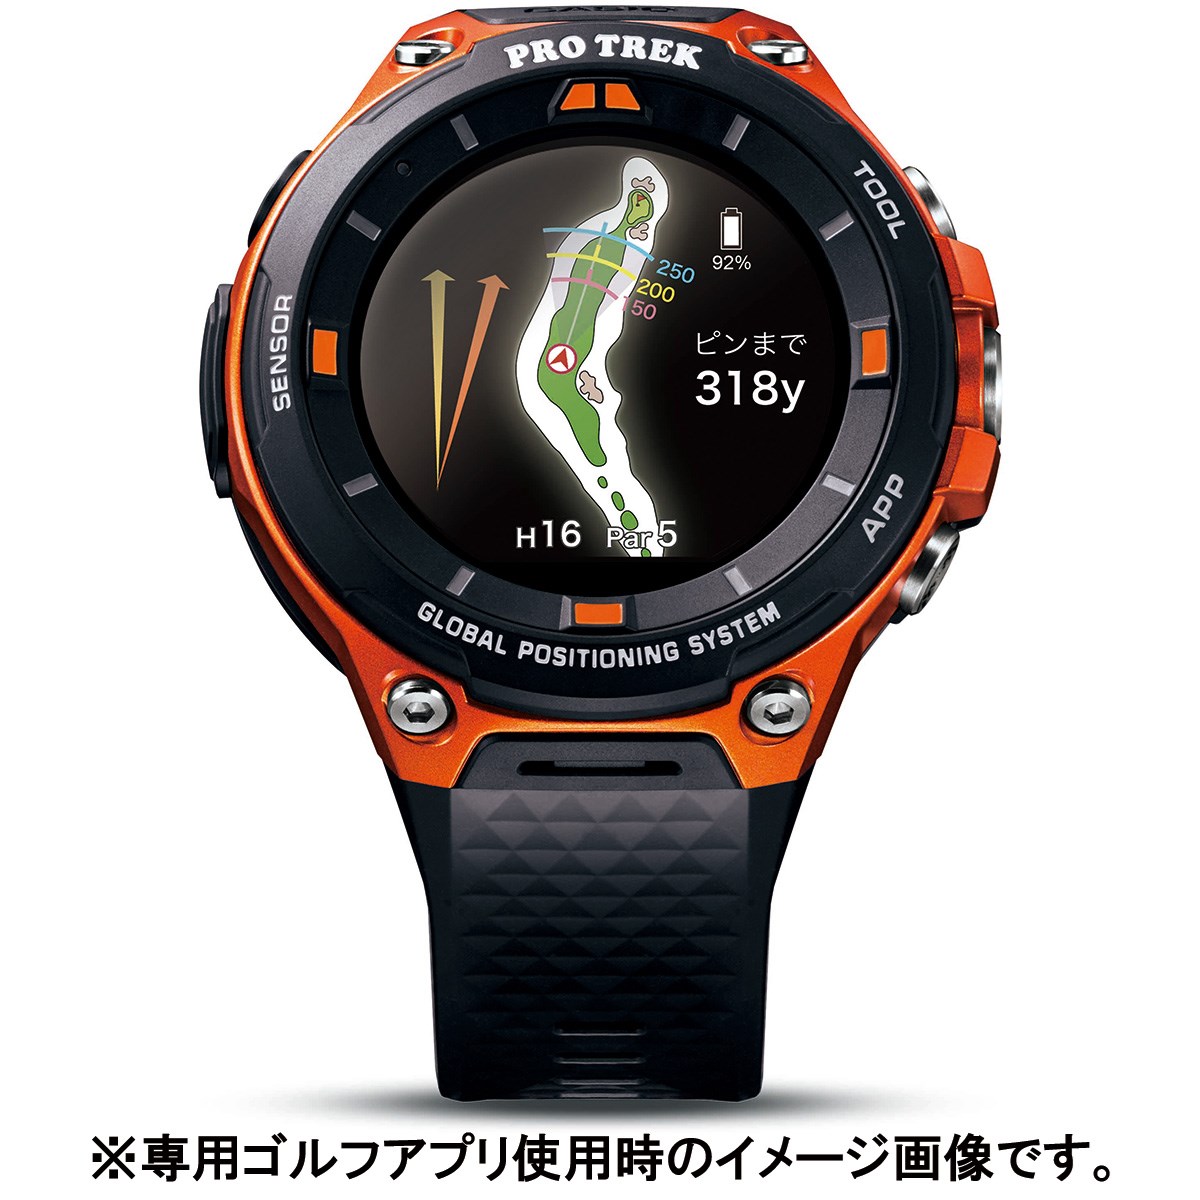 Hole19 Now Available On Casio Pro Trek Smartwatch